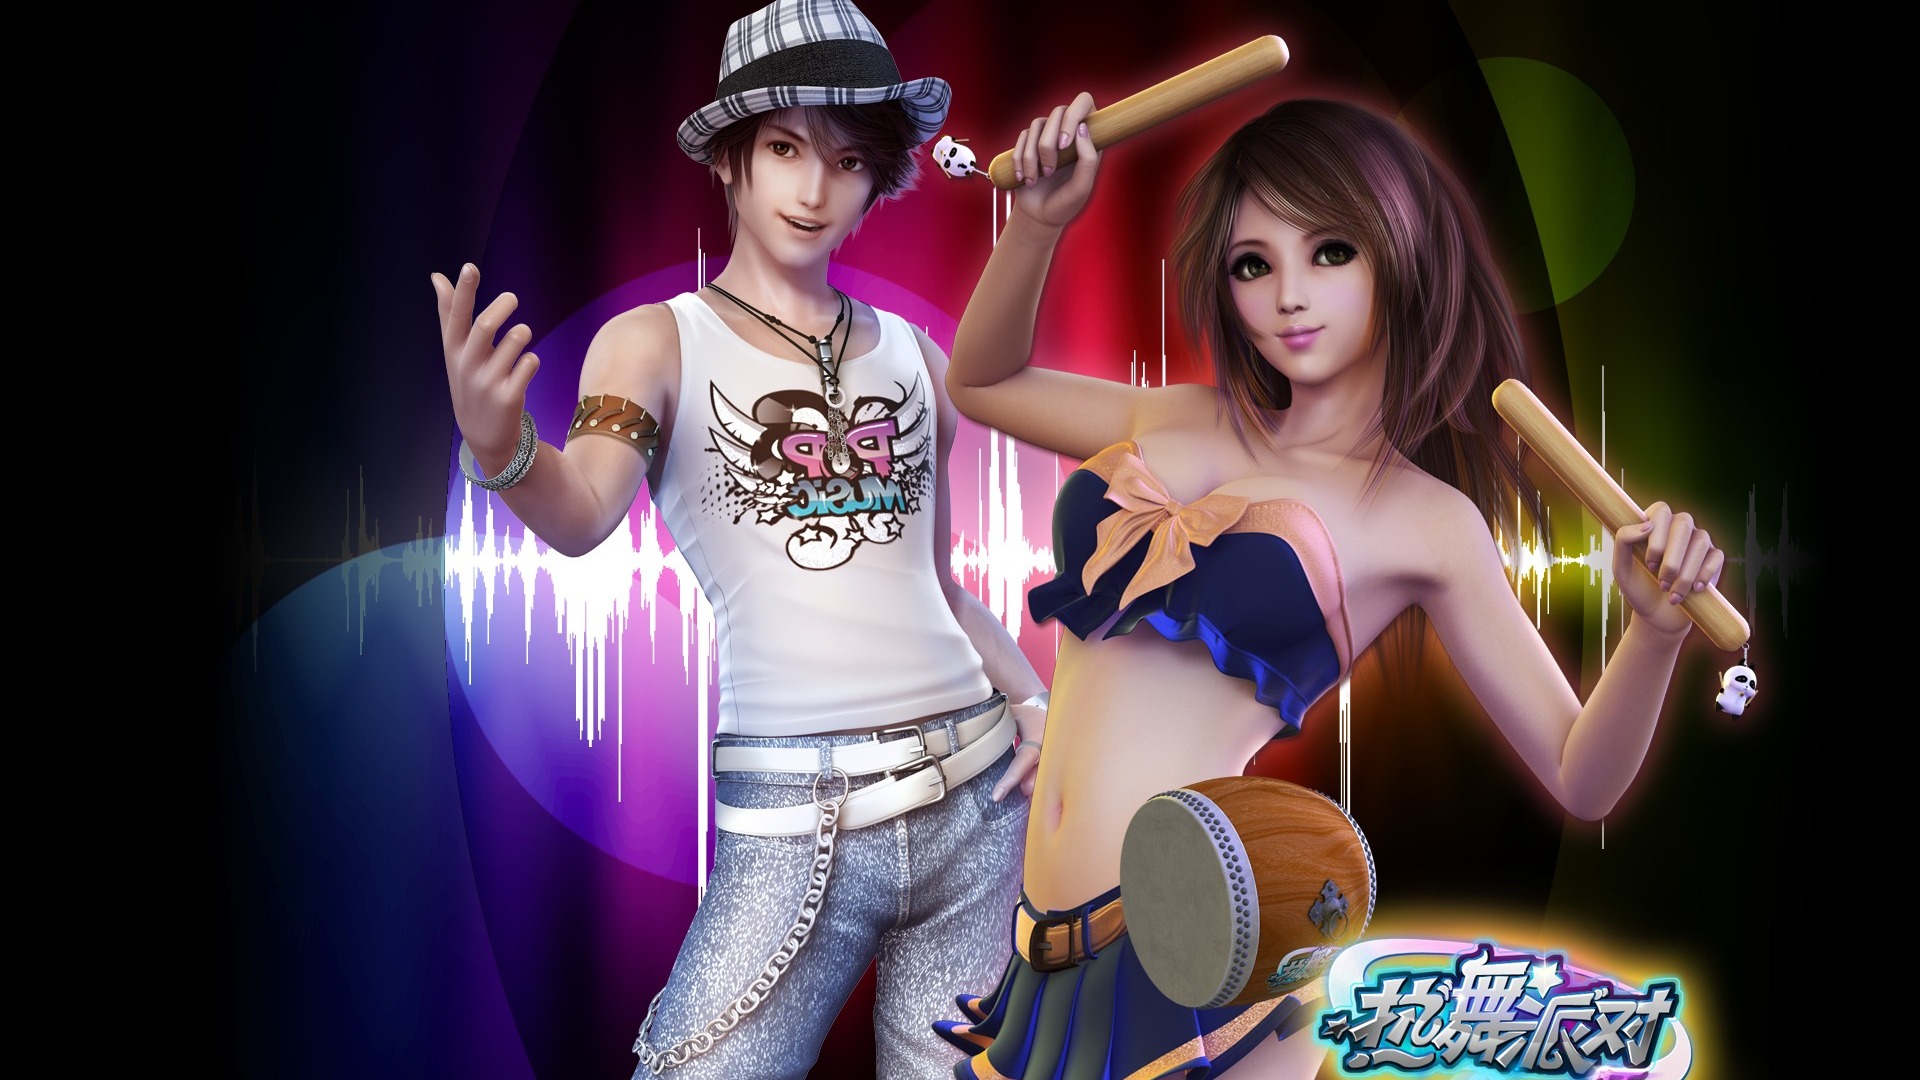 Online game Hot Dance Party II official wallpapers #20 - 1920x1080